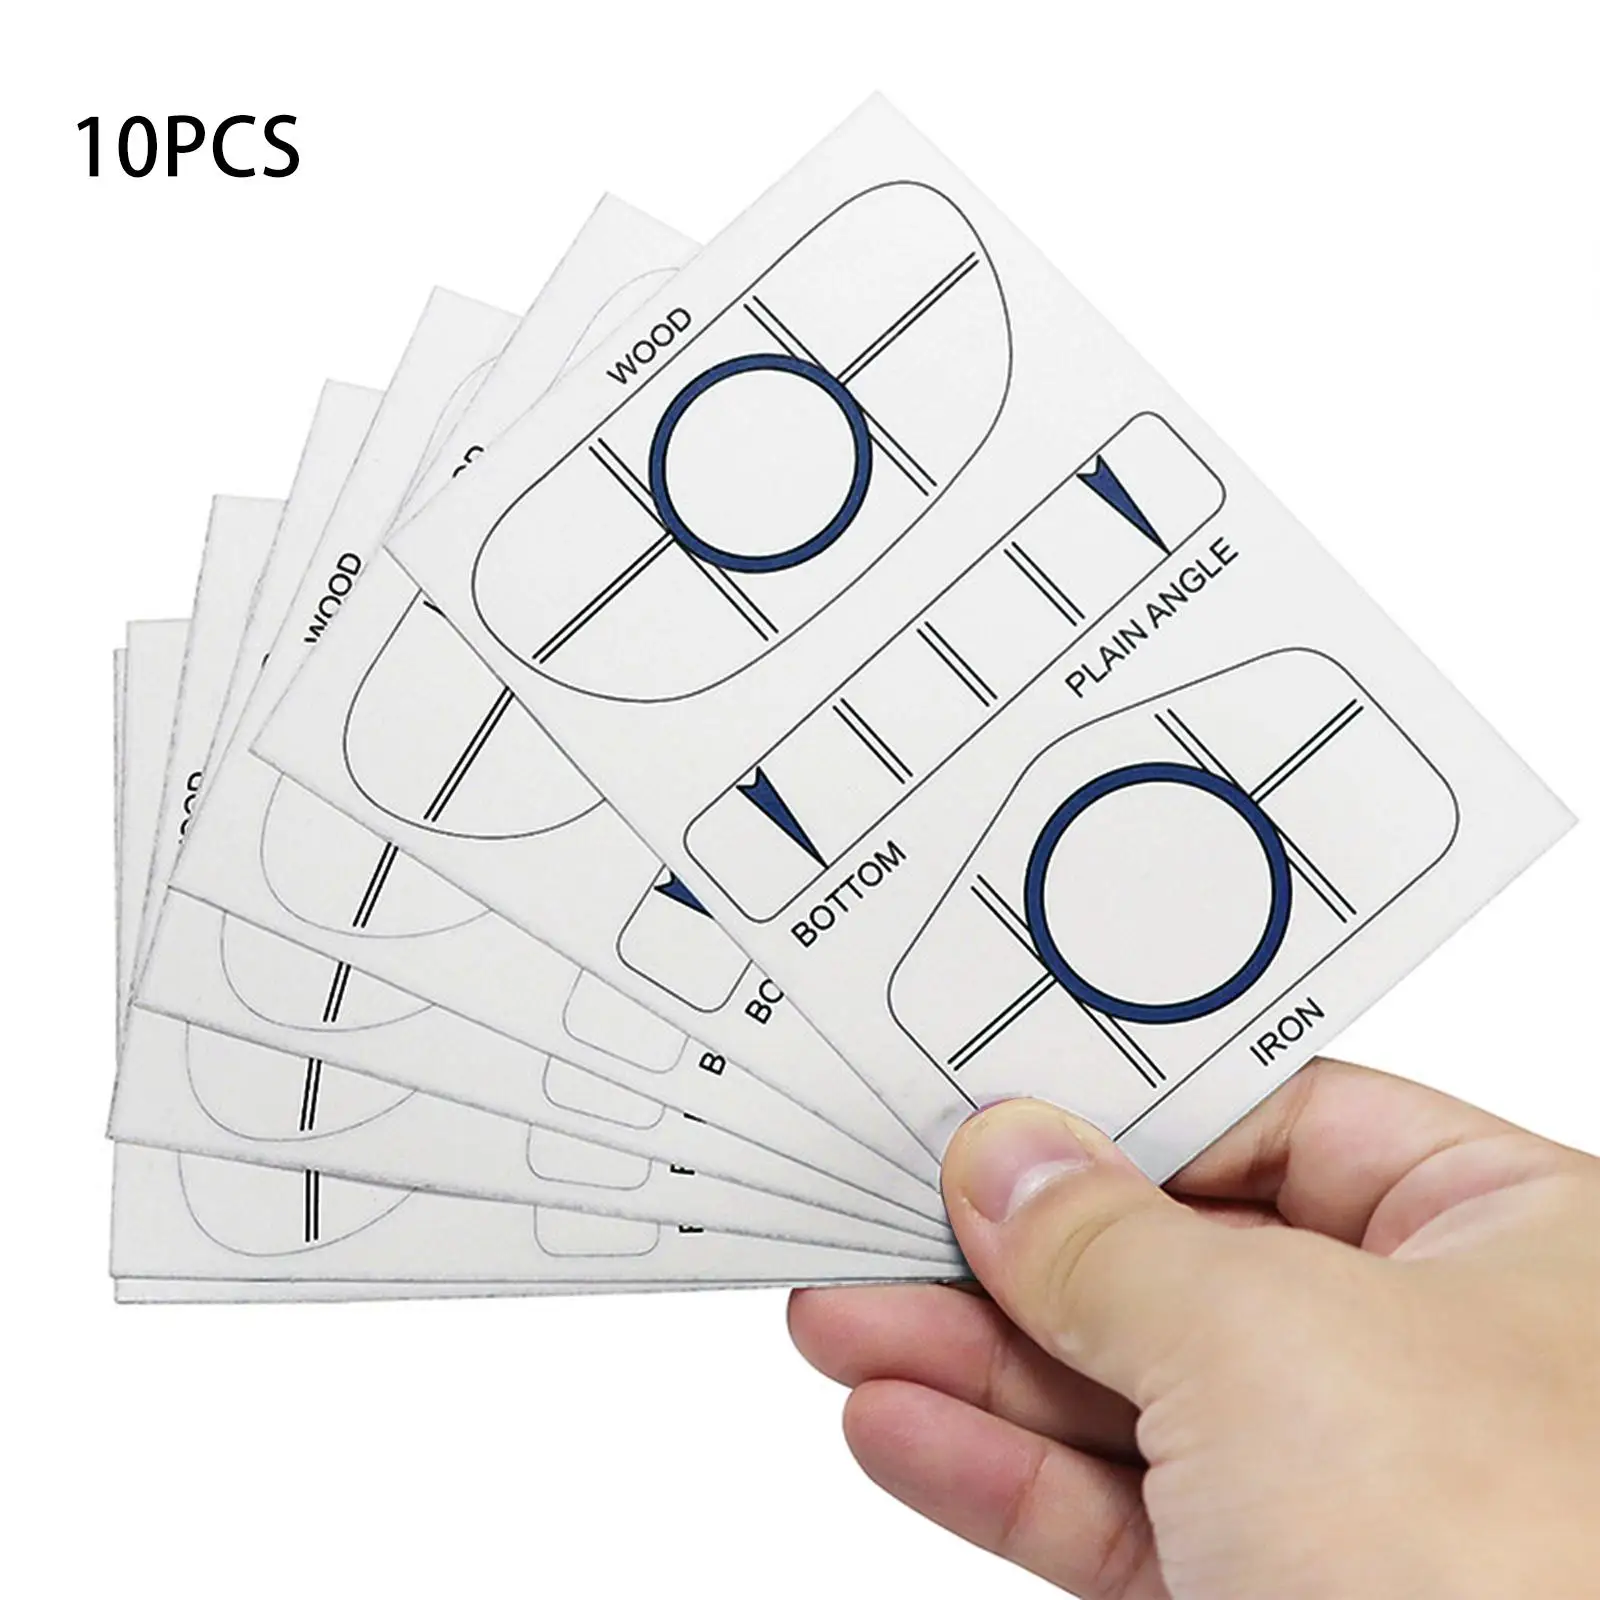 10Pcs Golf Impact Tape Labels Iron Wood and Putters Golf Impact Stickers Golf Impact Tape Stickers for Improve Swing Accuracy